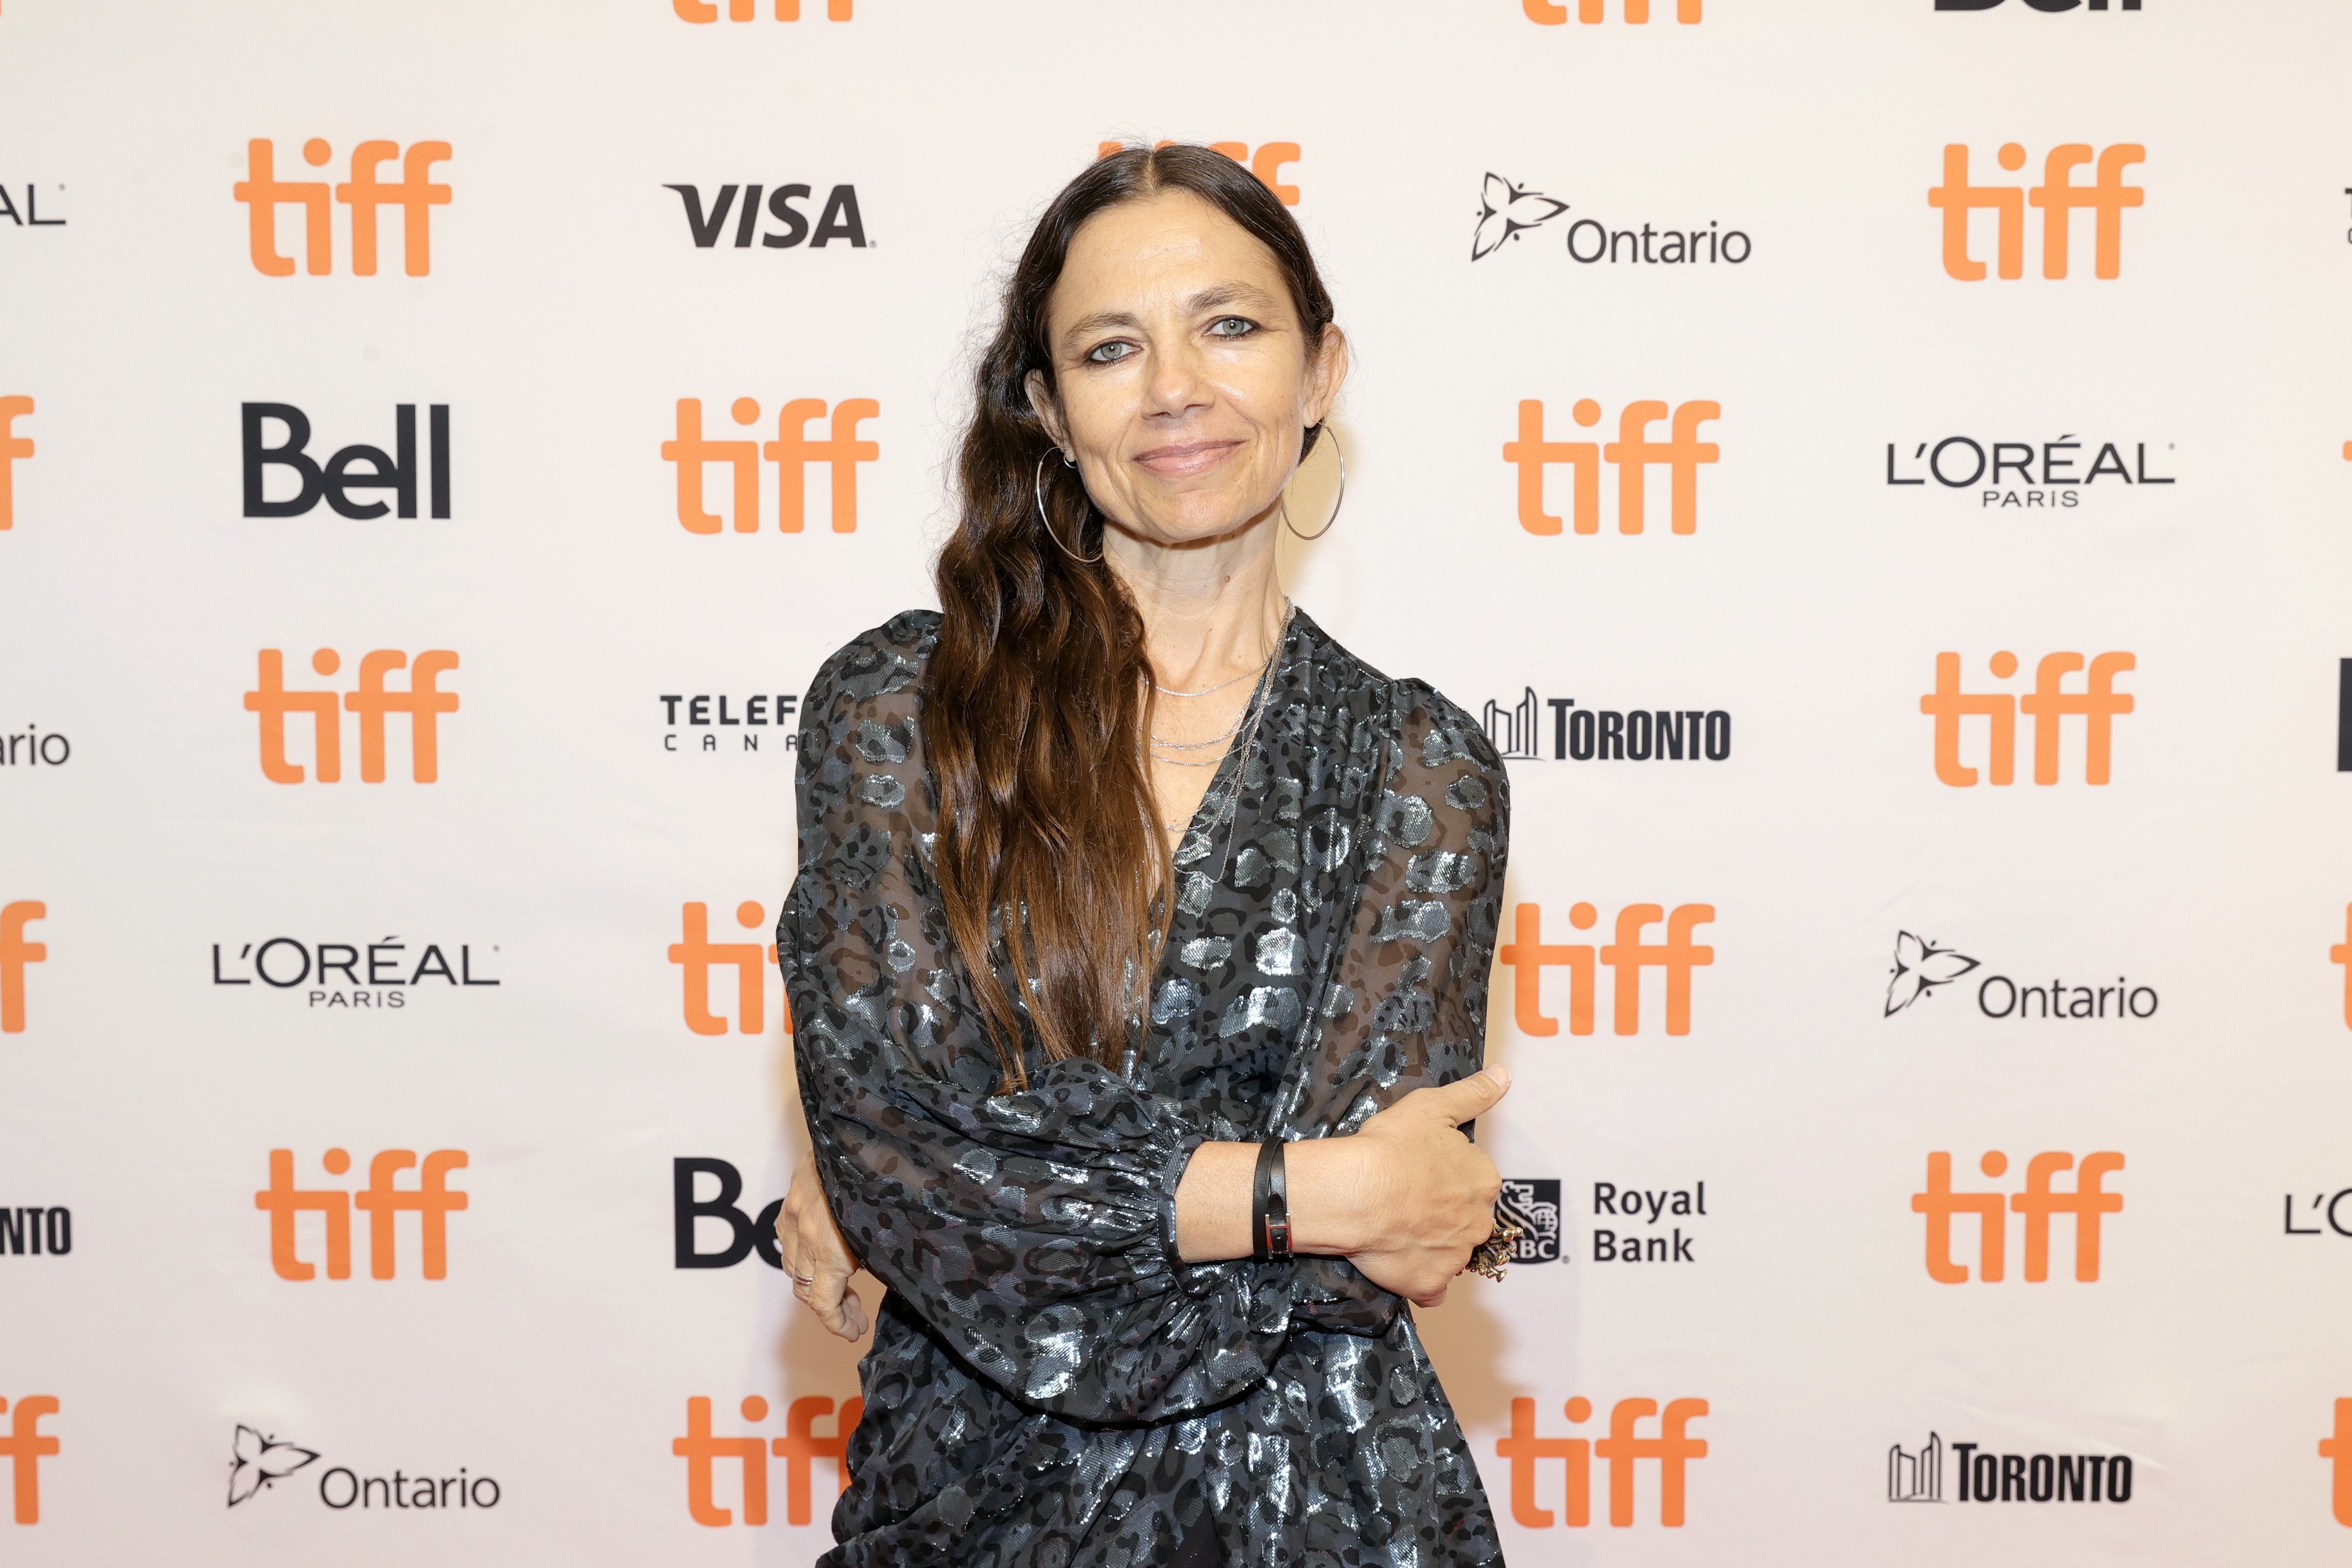 Justine Bateman poses on the carpet at the Violet photo call